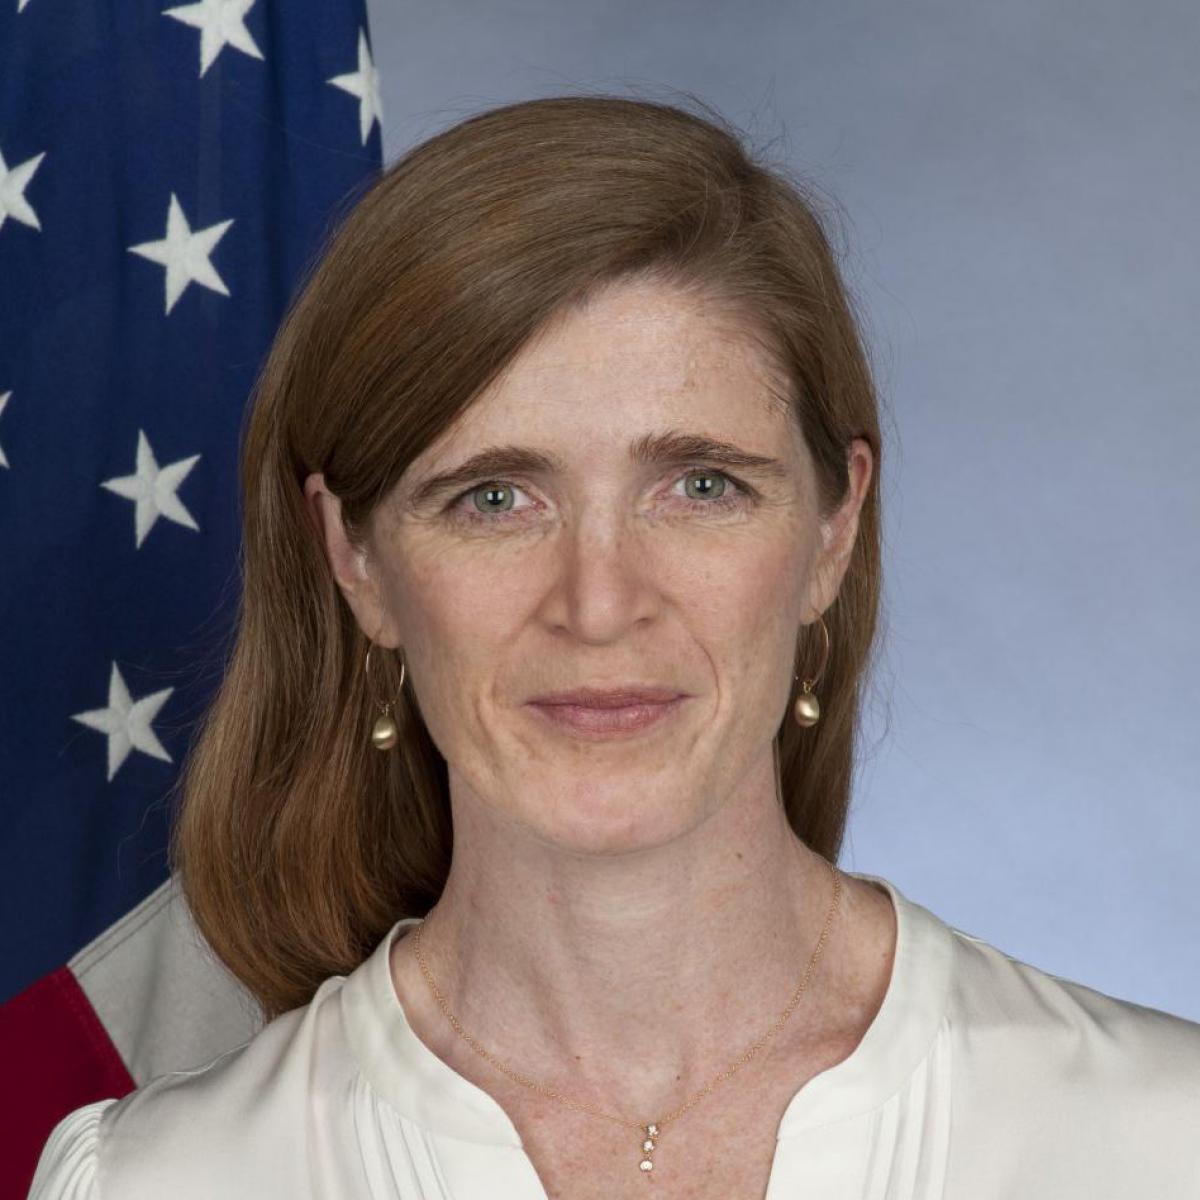 Director of the US Agency for International Development (USAID) Samantha Power